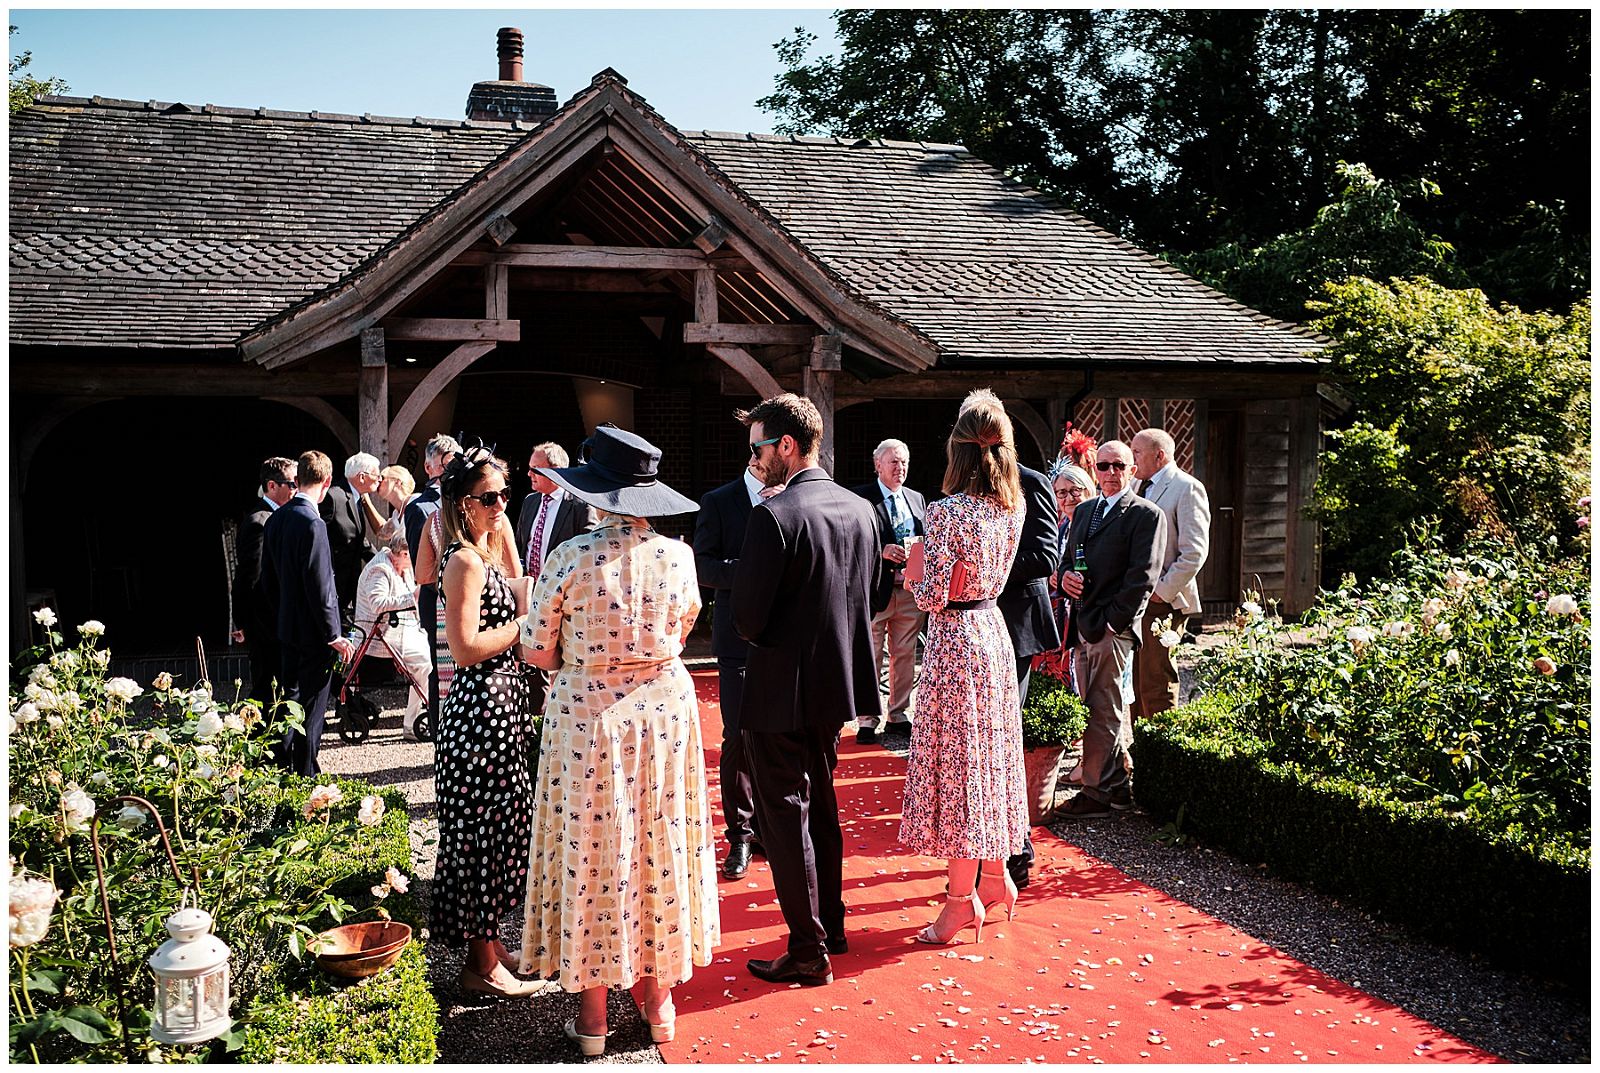 Candid photographs capturing the guests greeting the newlyweds at Goldstone Hall in Shropshire by Documentary Wedding Photographer Stuart James